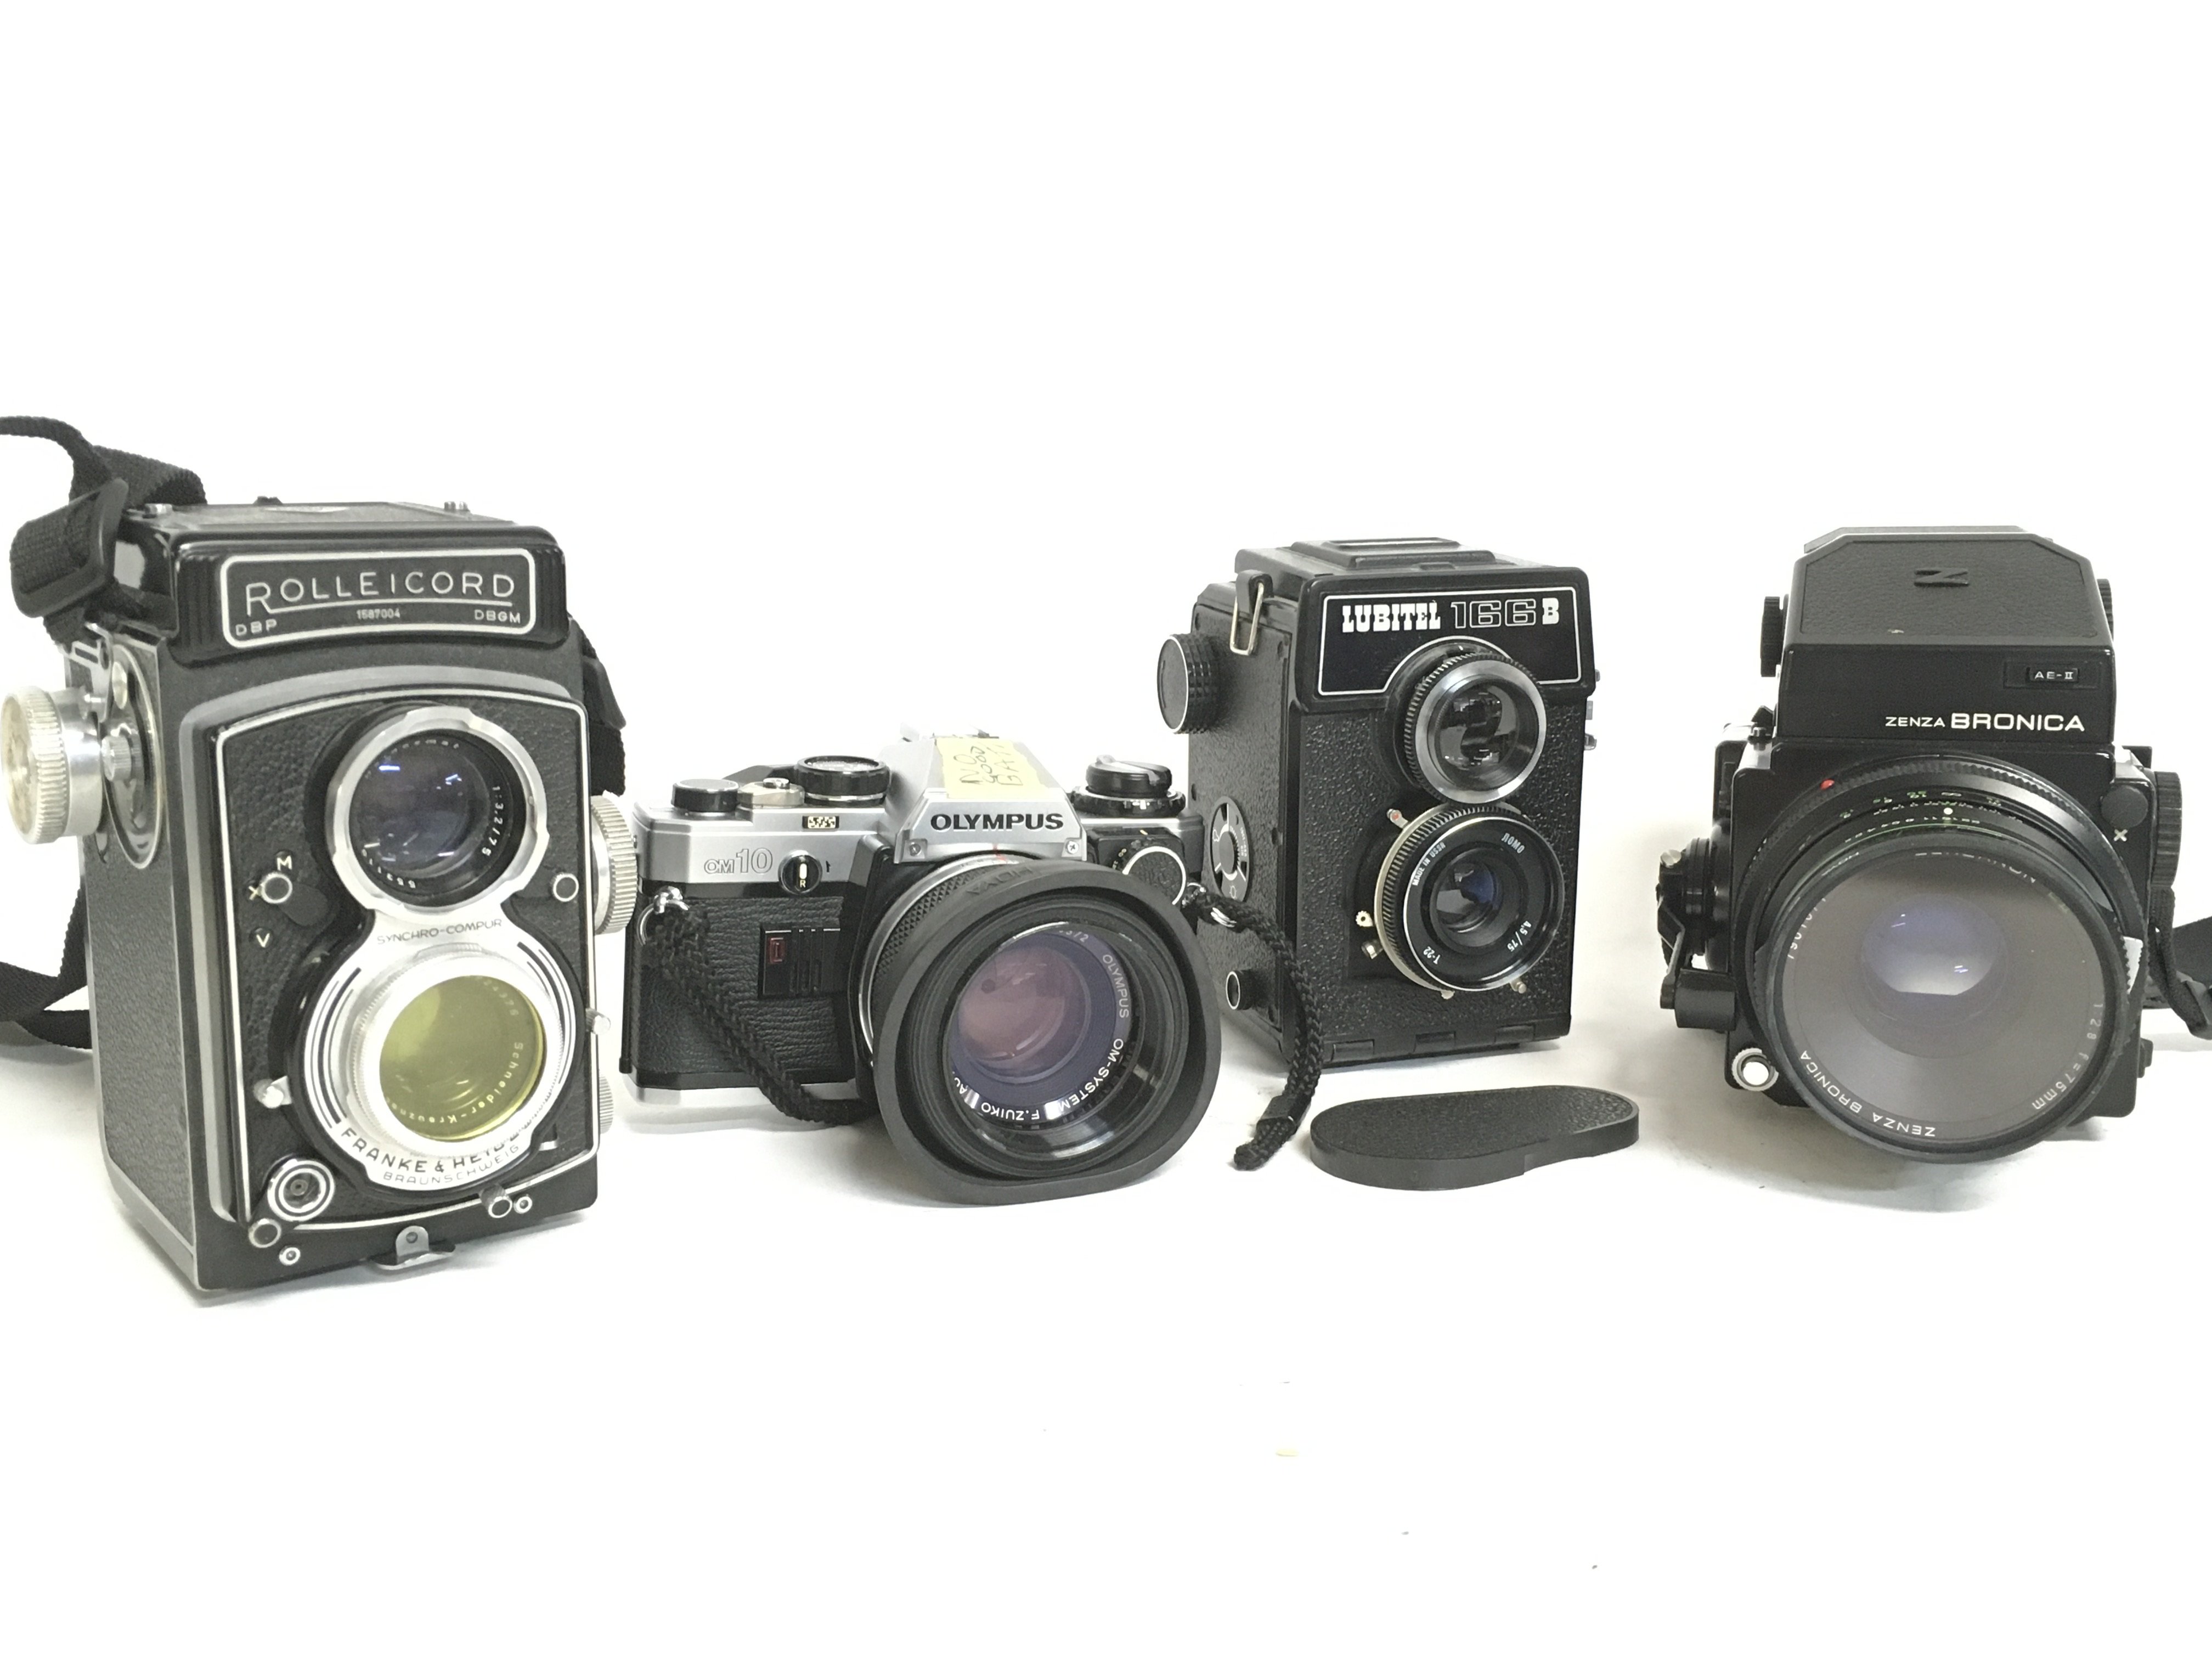 Vintage cameras including a Rolleicord, Olympus OM